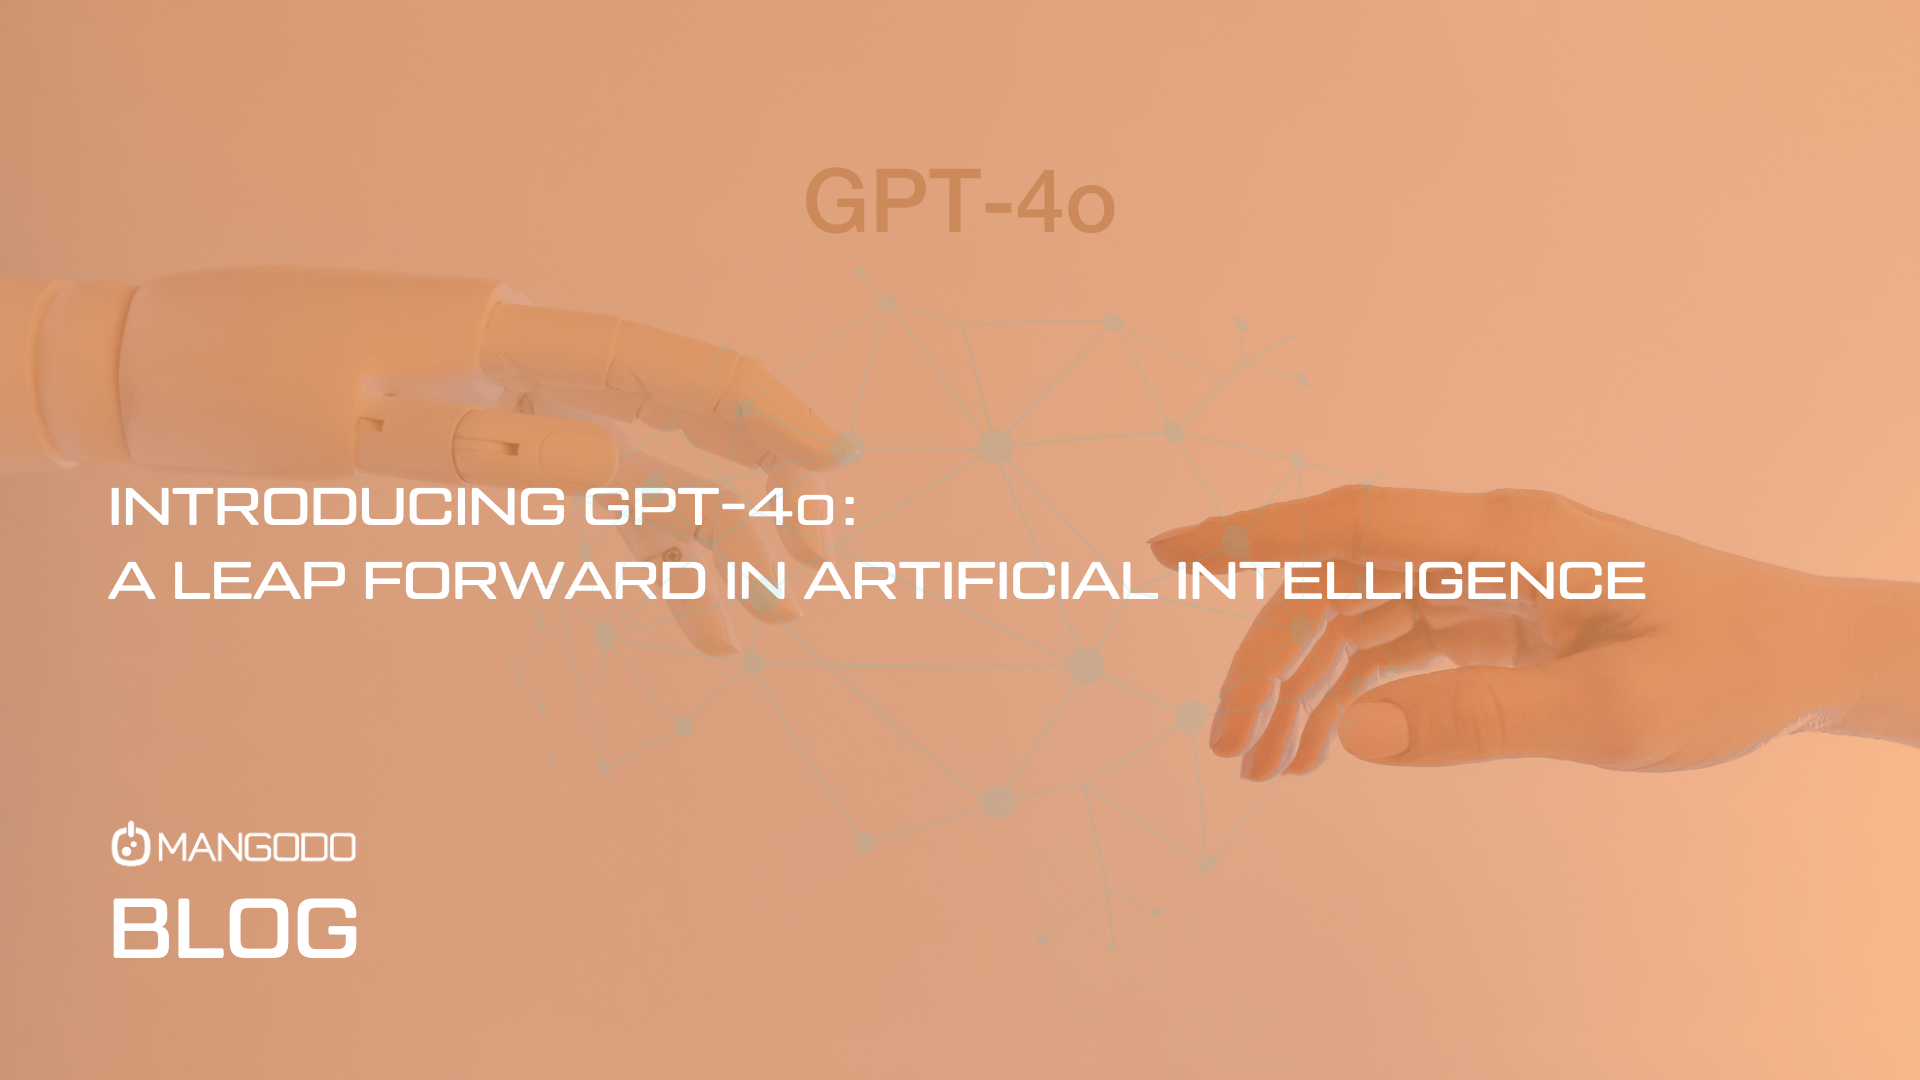 Introducing GPT-4o: A Leap Forward in Artificial Intelligence